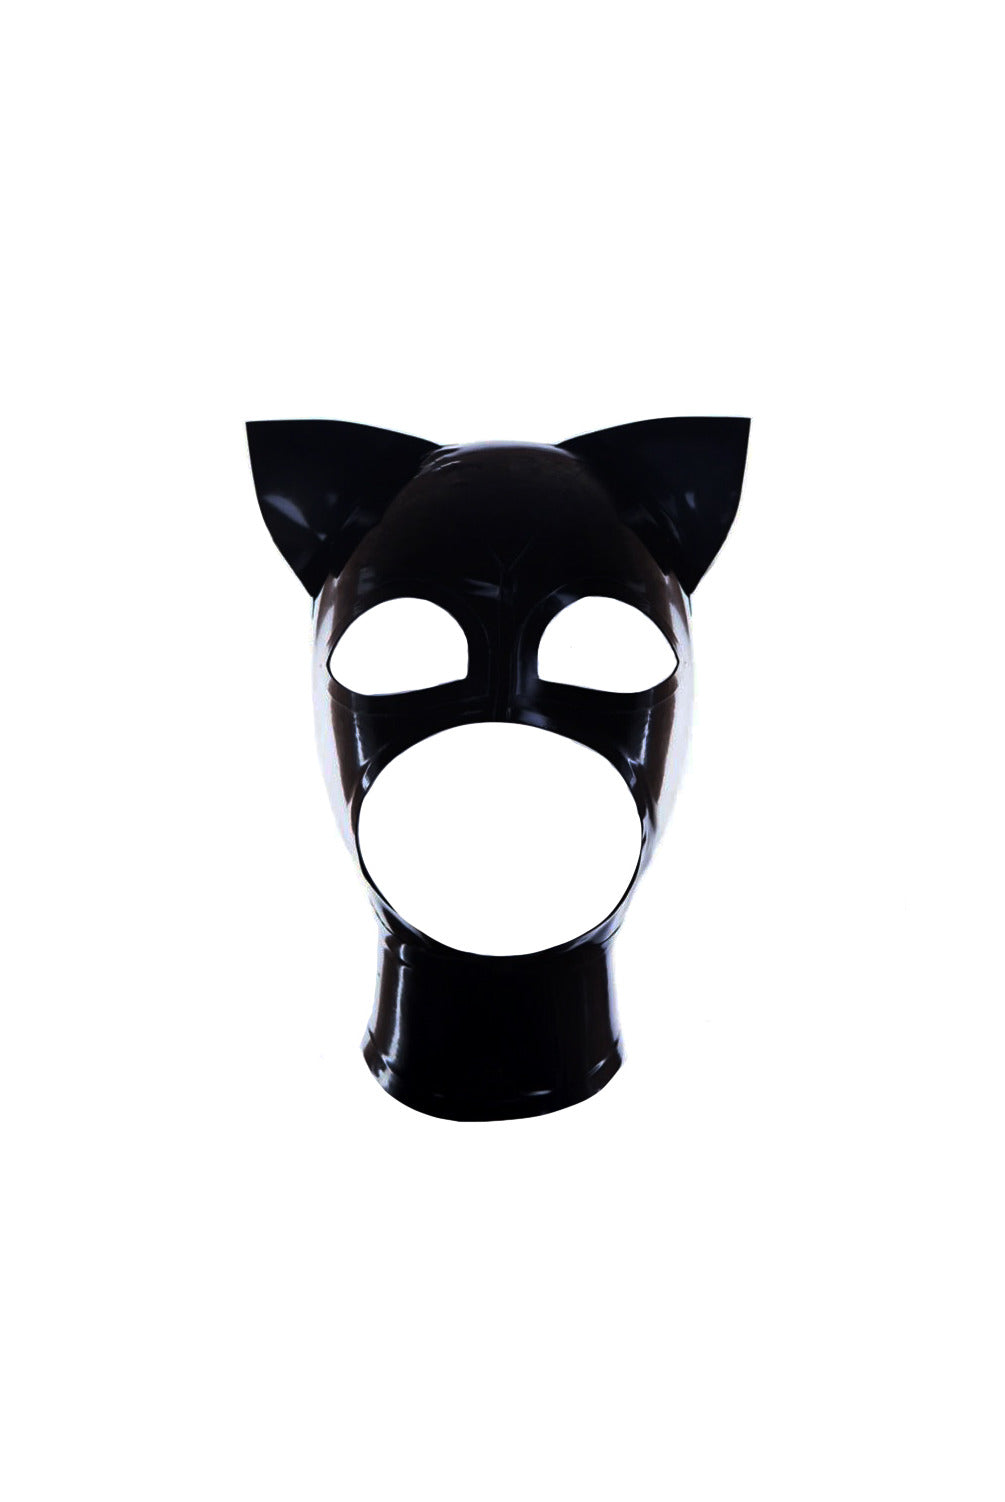 Latex cat mask with cut-outs for eyes, nose and mouth